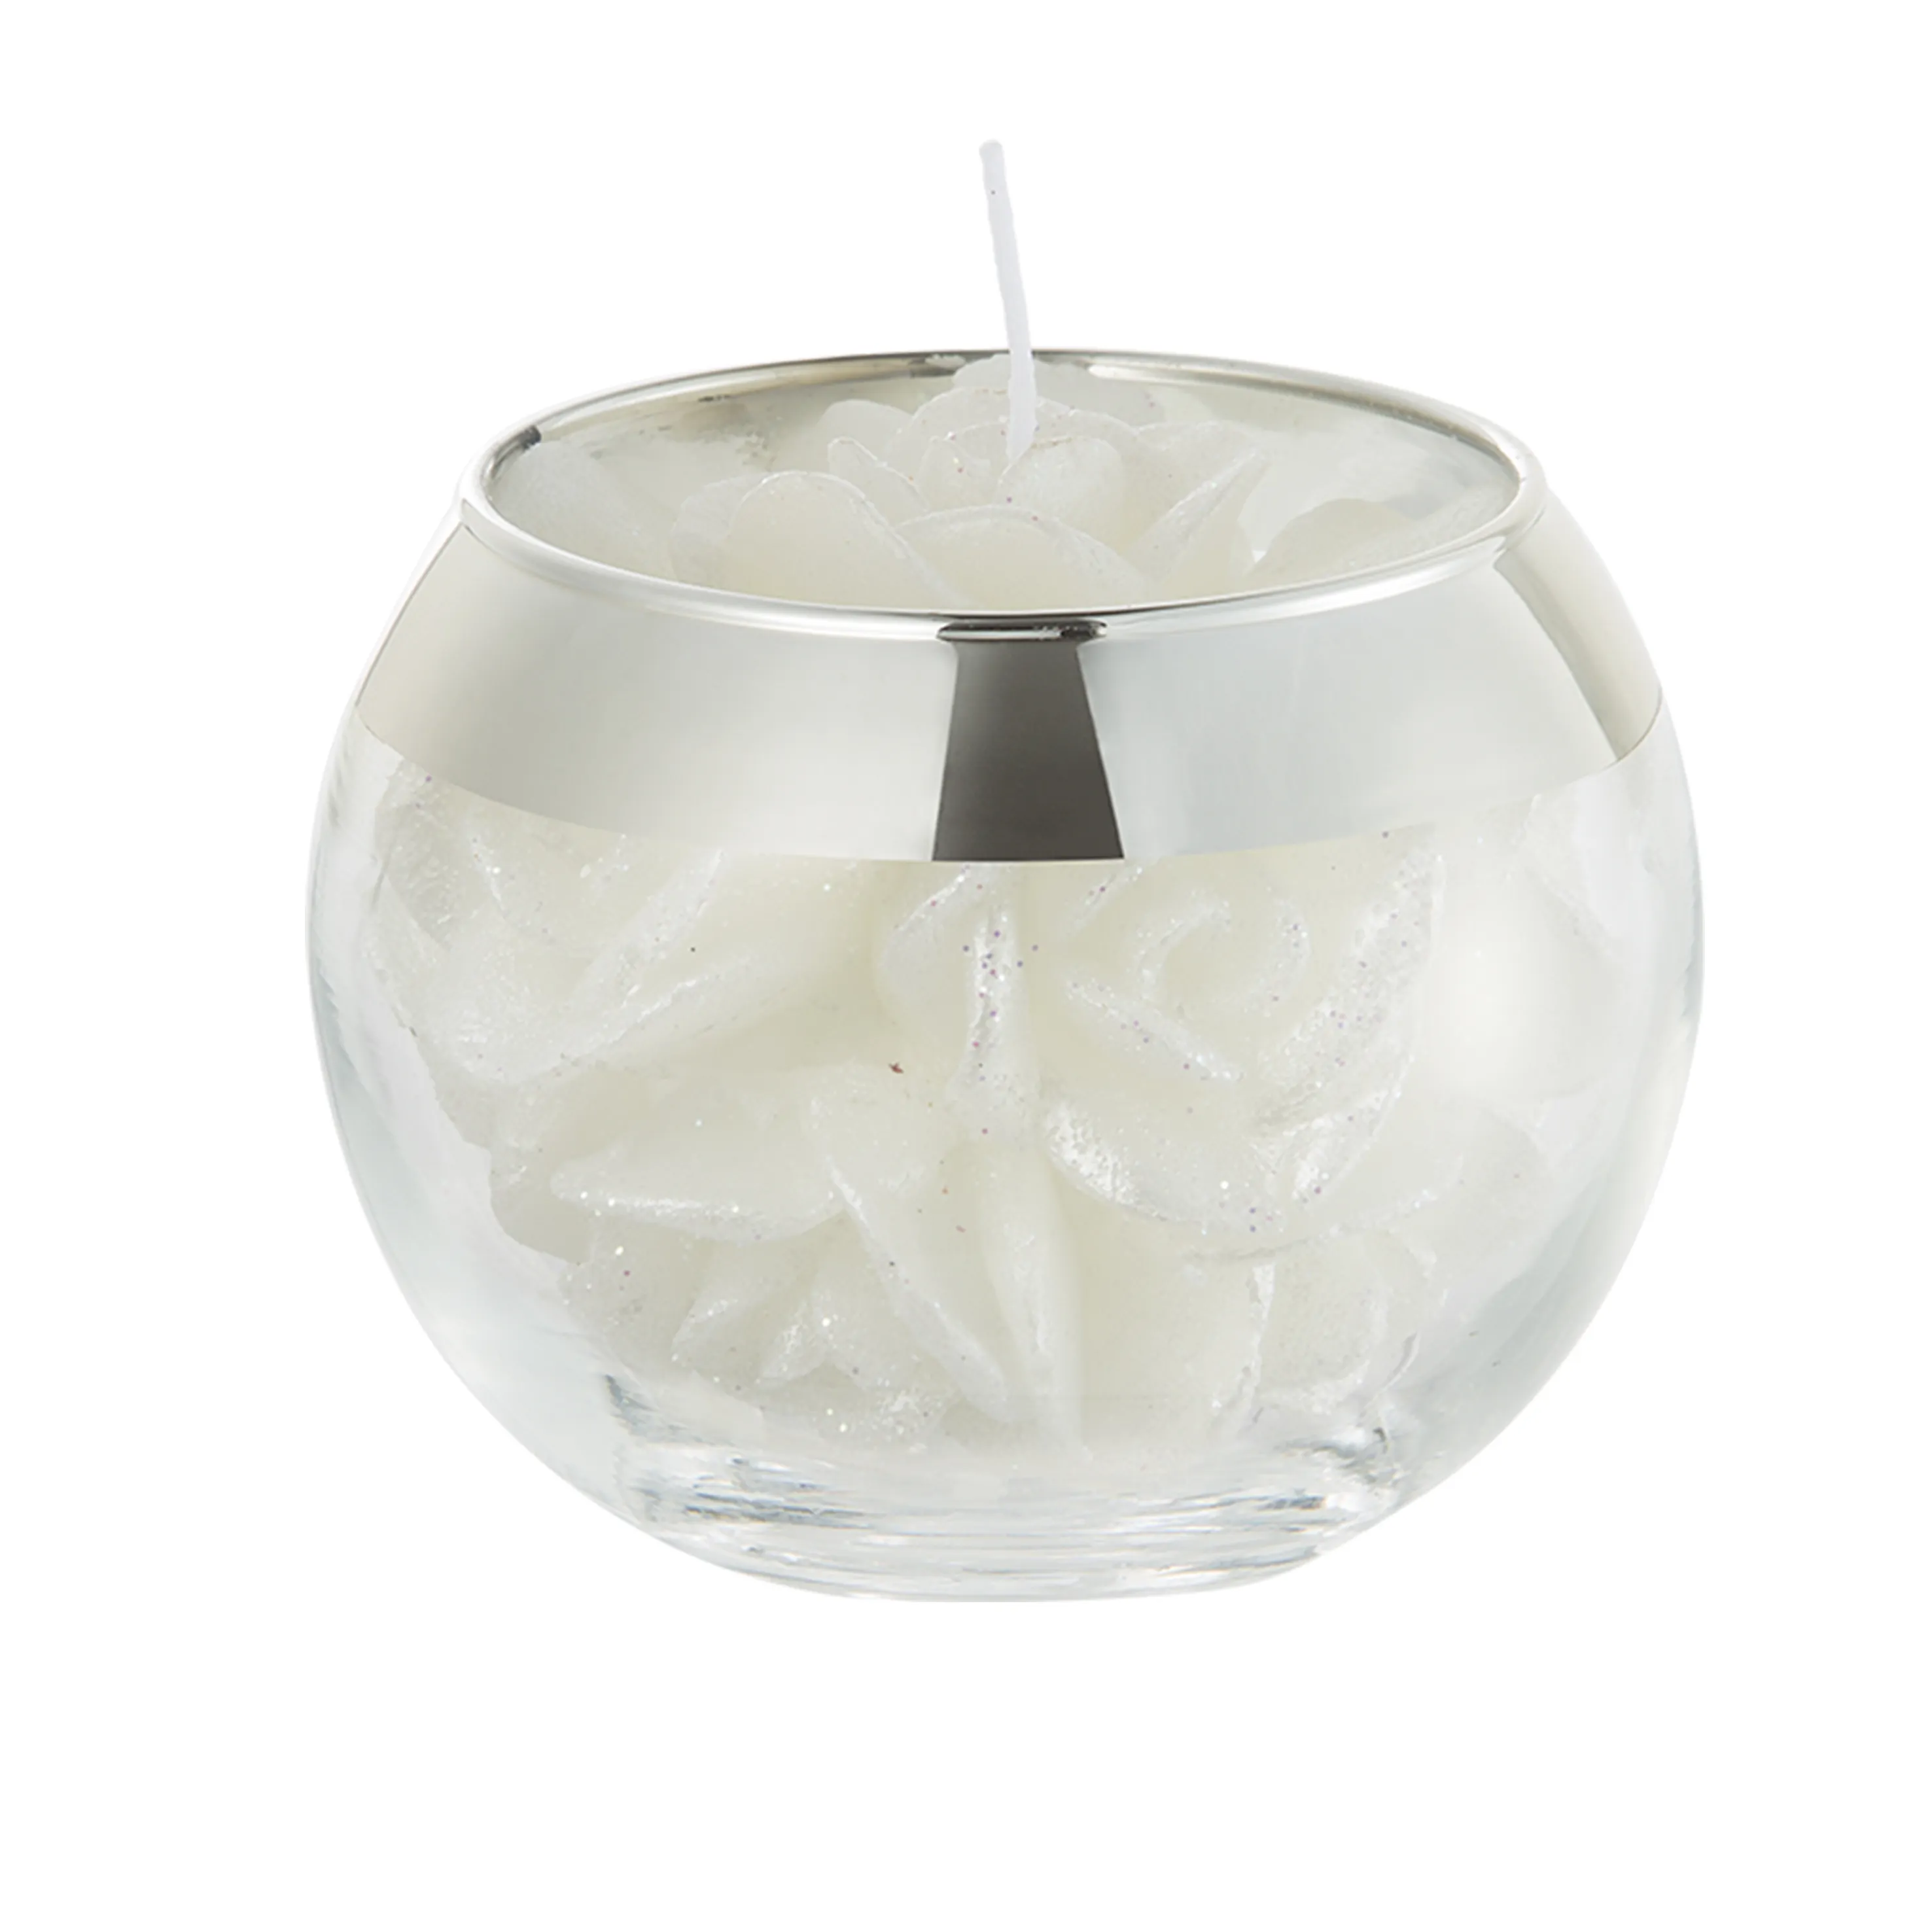 Luxury scented candles in white glass jars in bulk candles